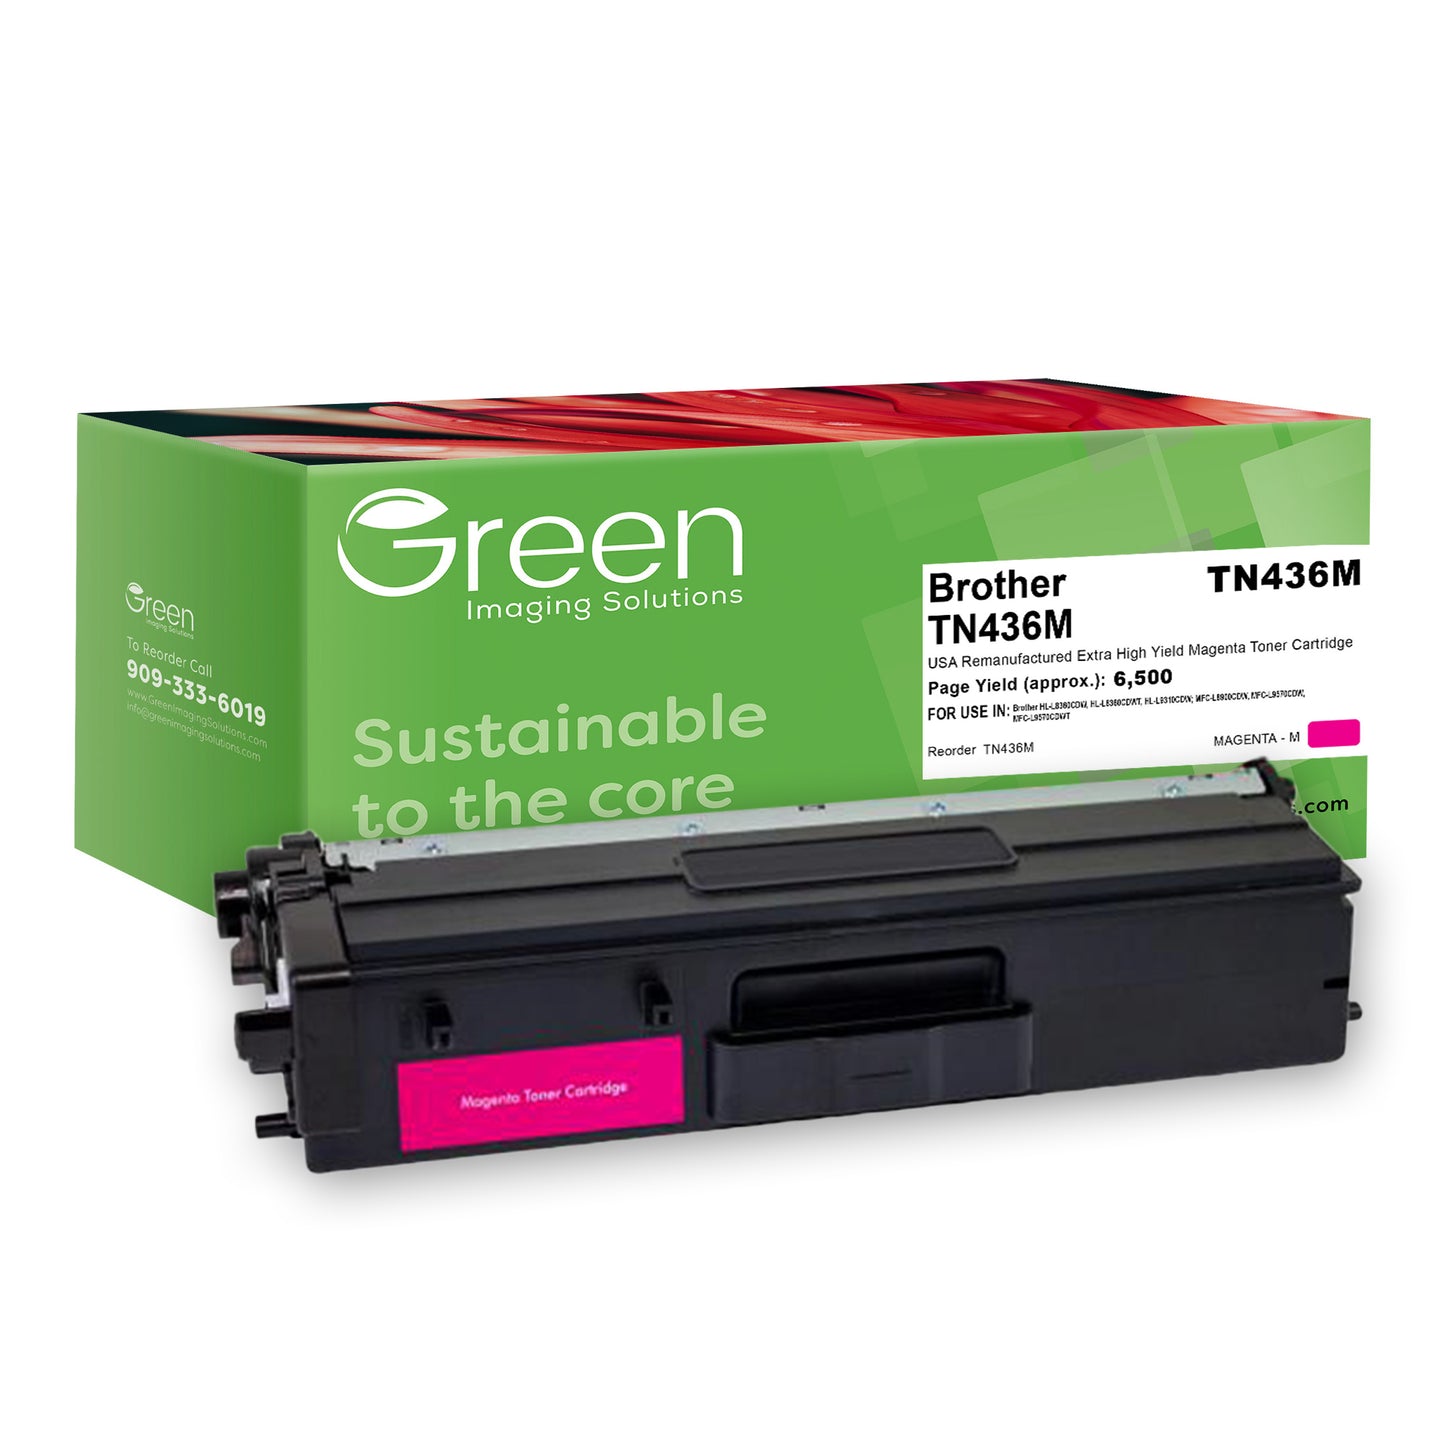 Green Imaging Solutions USA Remanufactured Extra High Yield Magenta Toner Cartridge for Brother TN436M